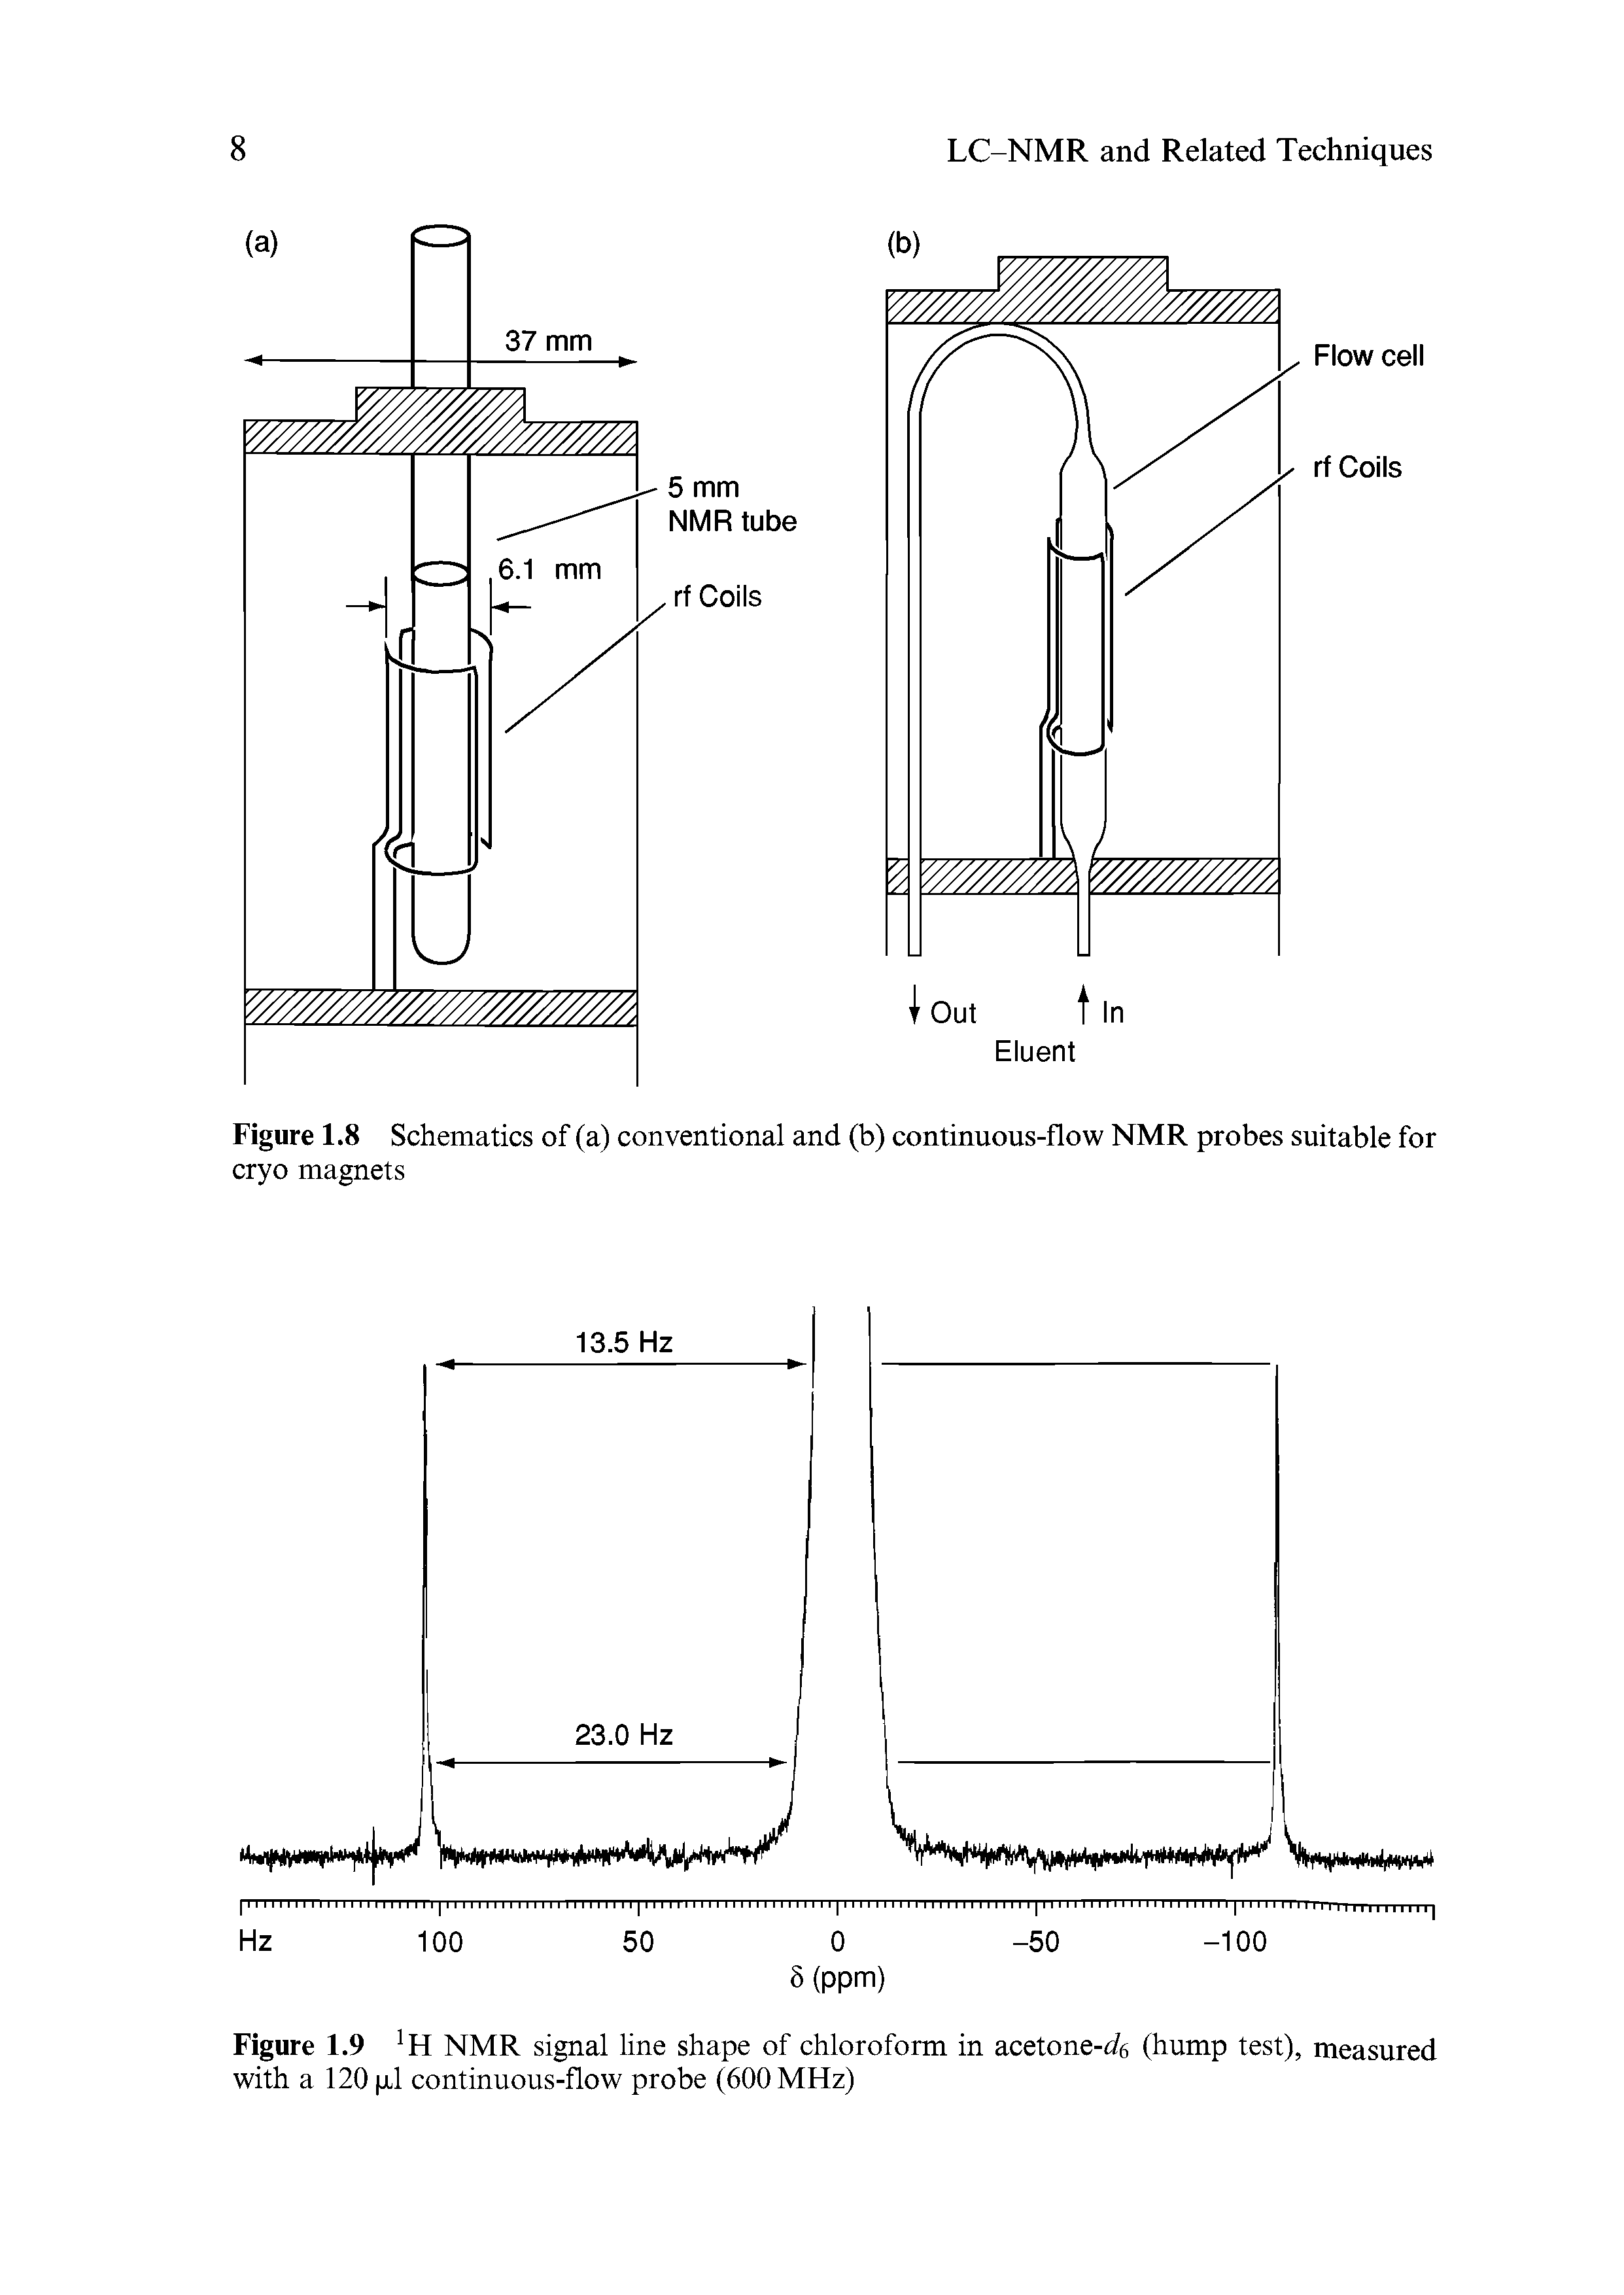 Figure 1.9 H NMR signal line shape of chloroform in acetone-c/f, (hump test), measured with a 120 pi continuous-flow probe (600 MHz)...